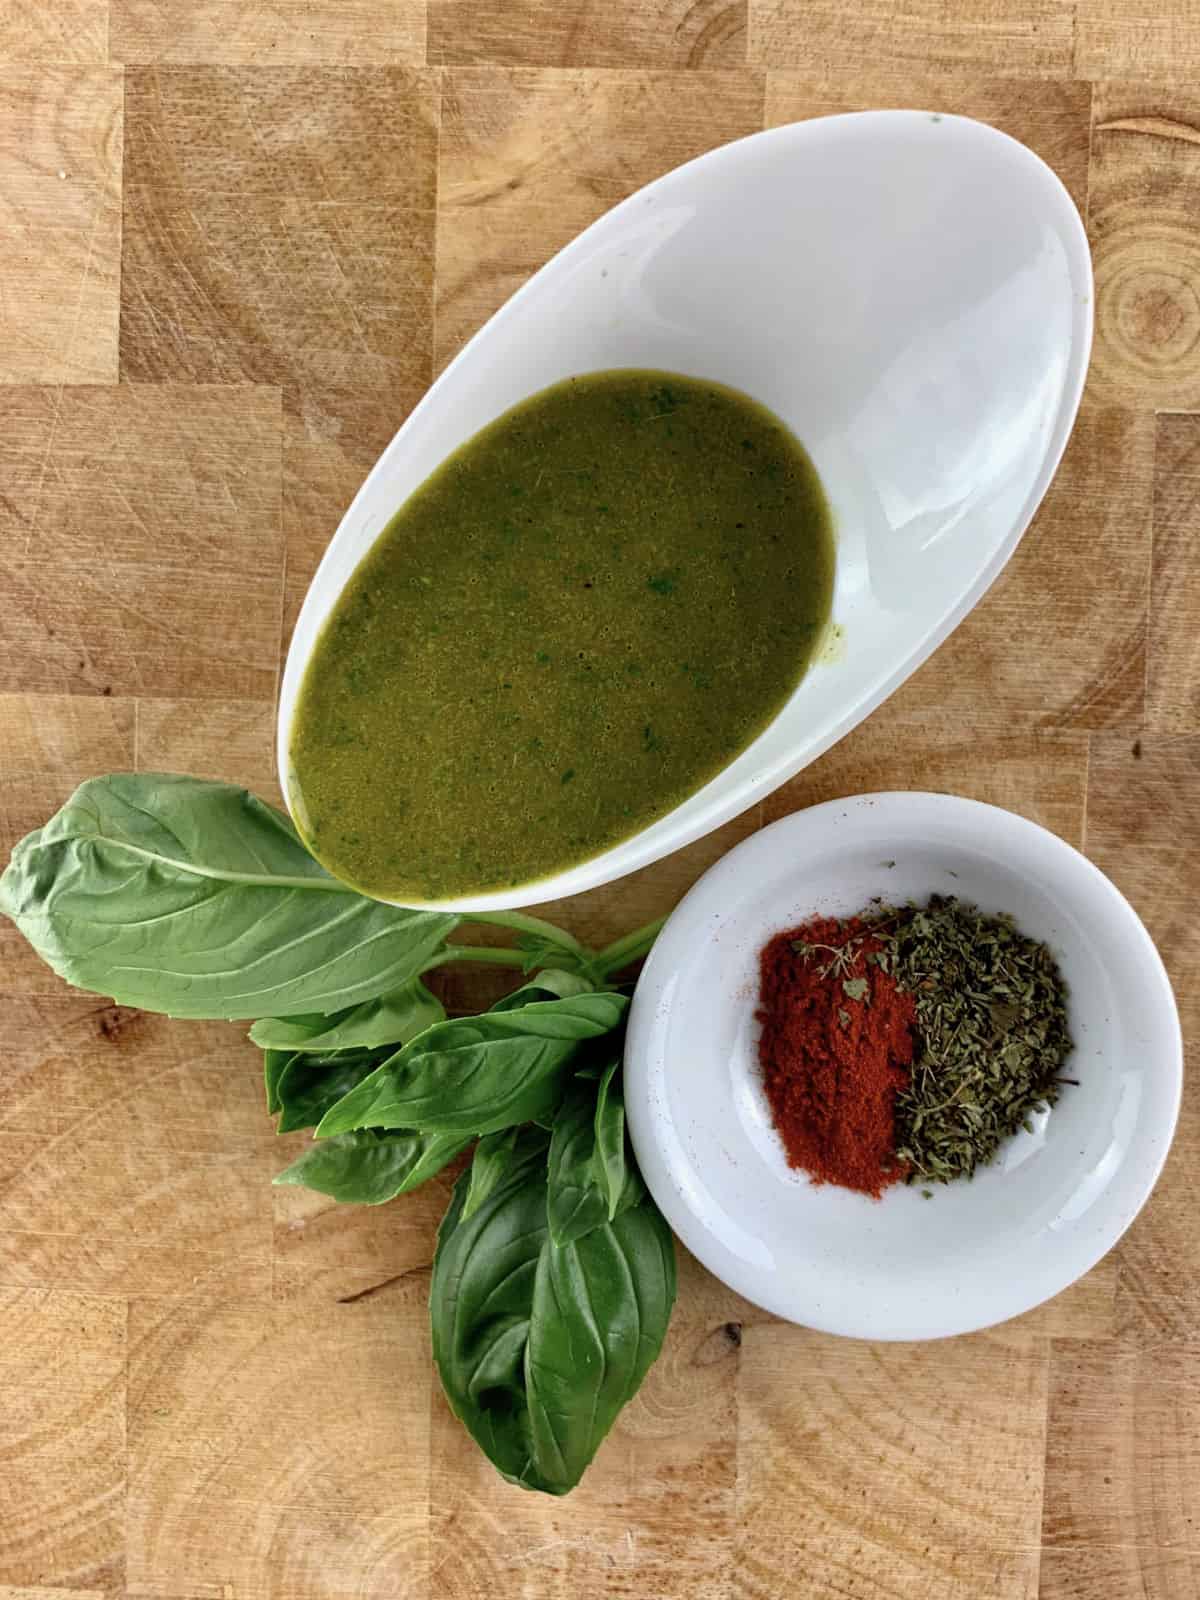 Italian vinaigrette in a white bowl with fresh basil and paprika and dried oregano in a white bowl on the side.